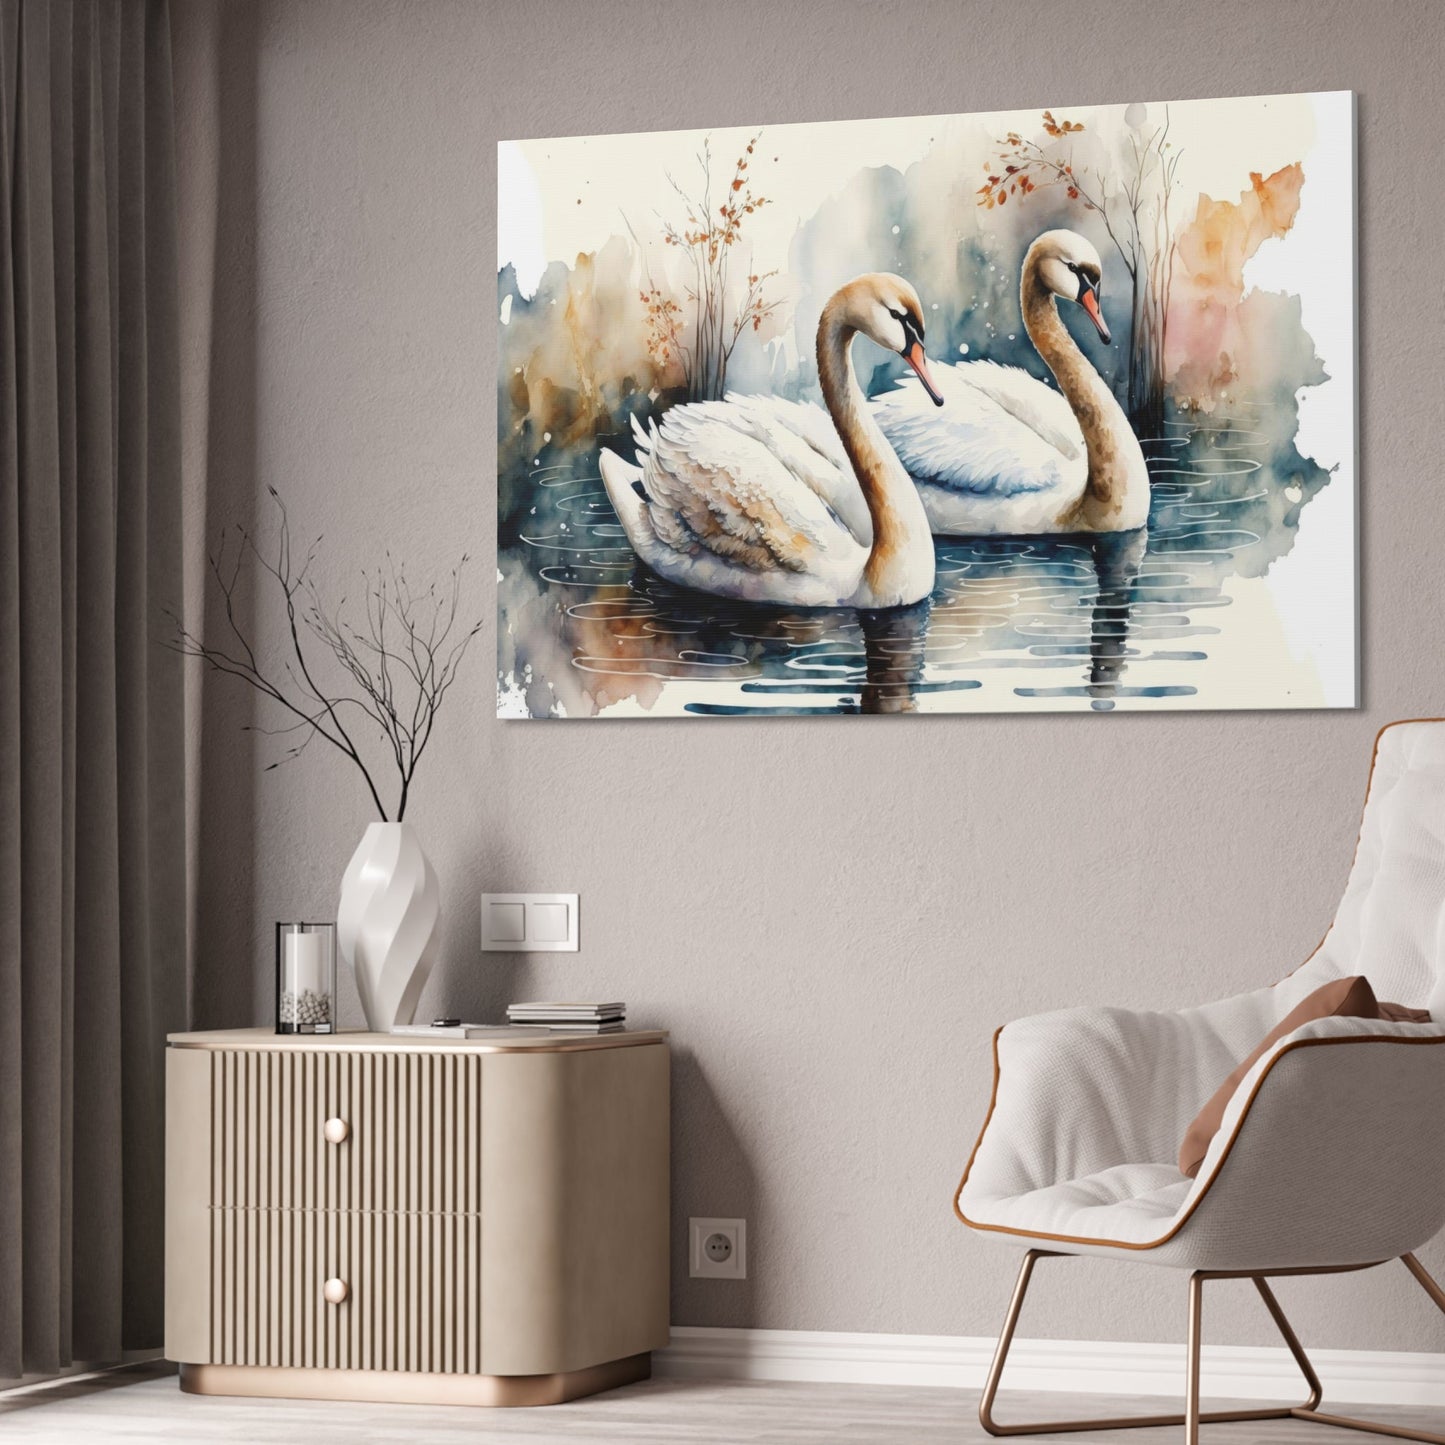 Gentle Giants: Framed Poster and Print on Canvas Featuring Majestic Swans